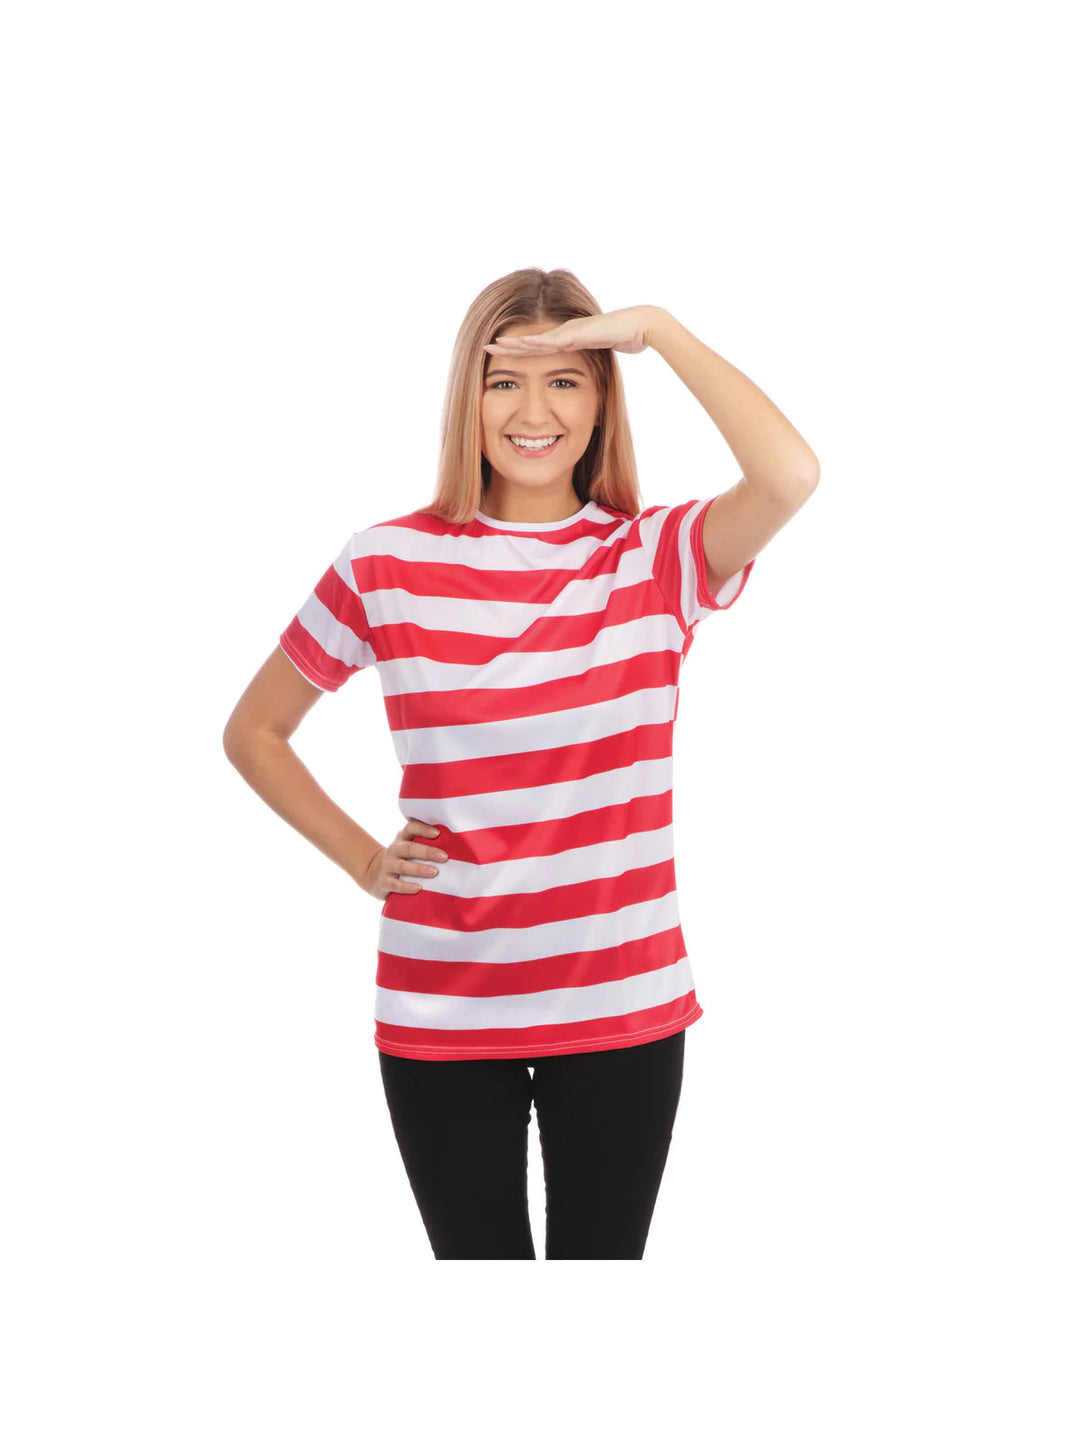 Womens Striped Ladies Shirt Red White Wheres Wally Costume_1